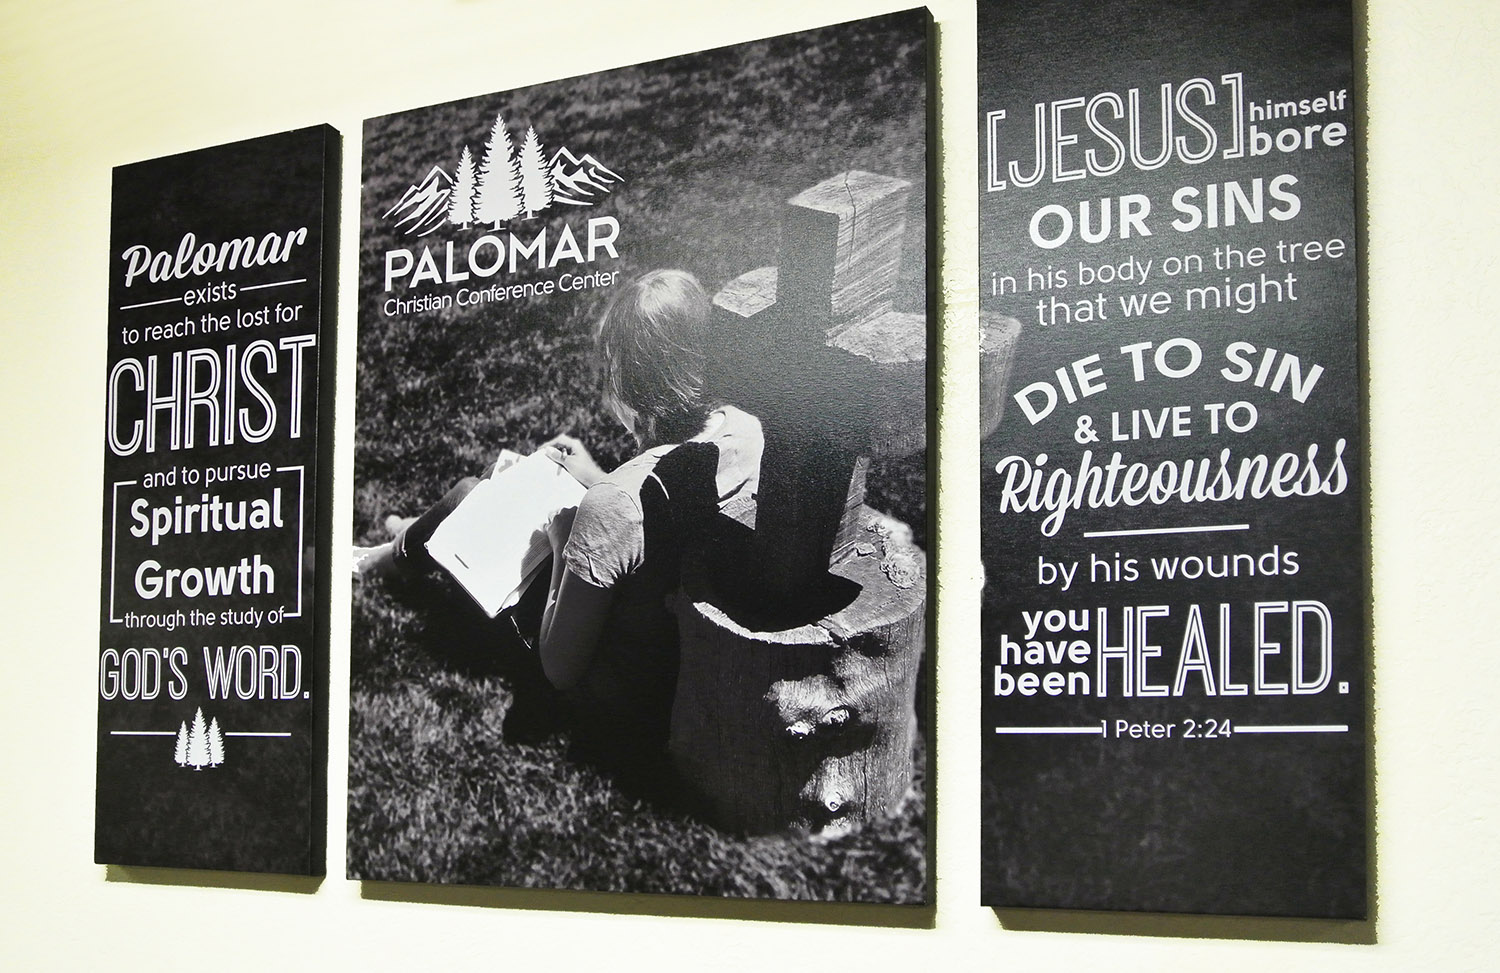 Palomar Christian Conference Center wall sign